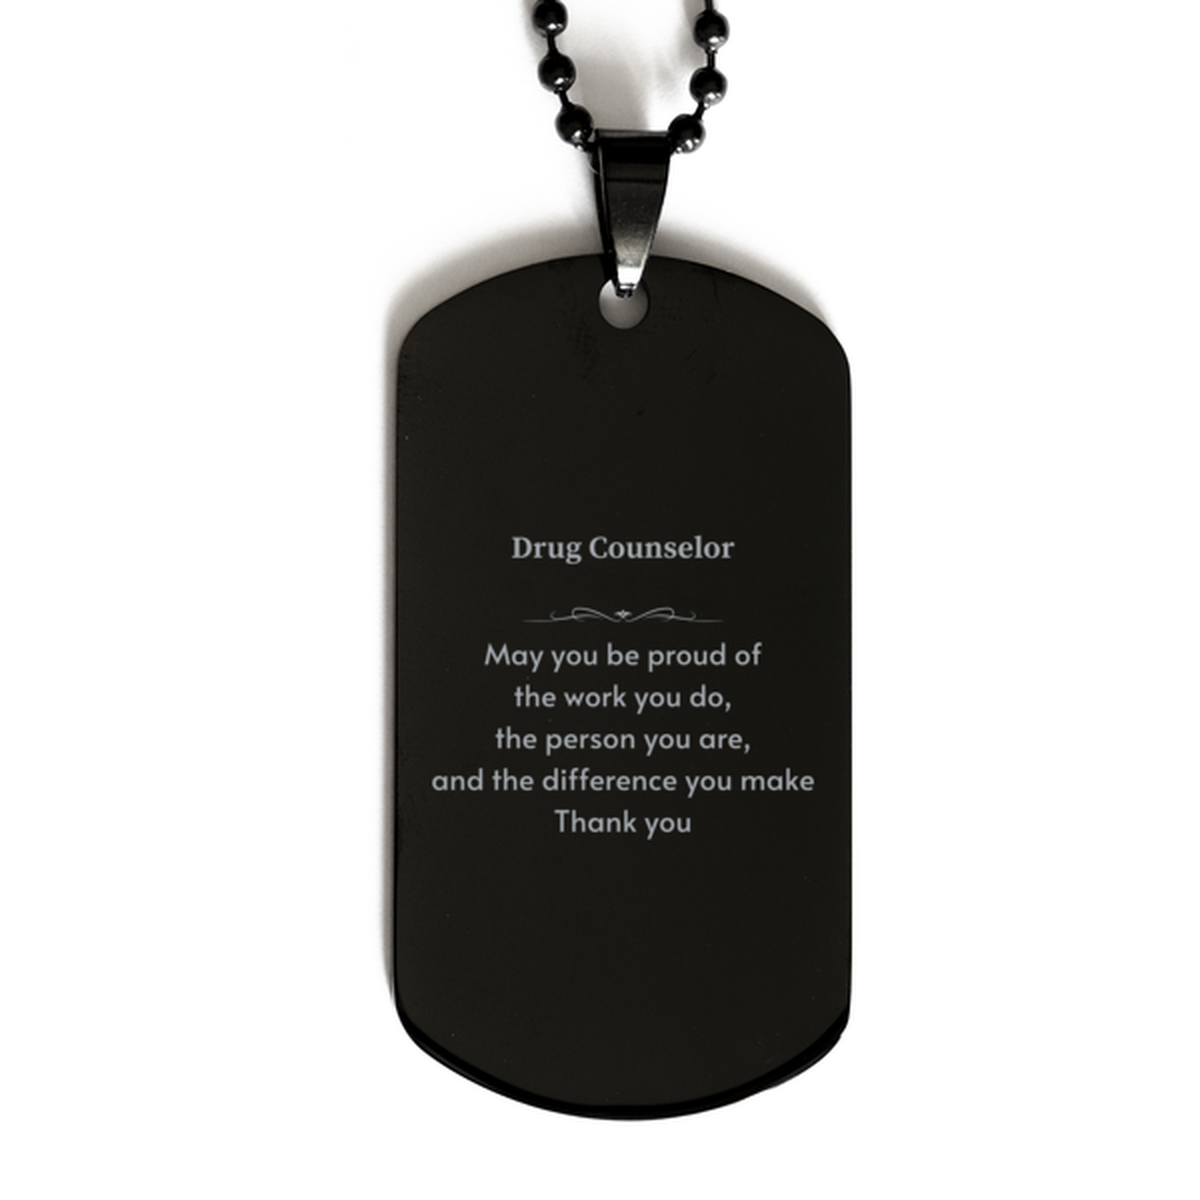 Heartwarming Black Dog Tag Retirement Coworkers Gifts for Drug Counselor, Drug Counselor May You be proud of the work you do, the person you are Gifts for Boss Men Women Friends